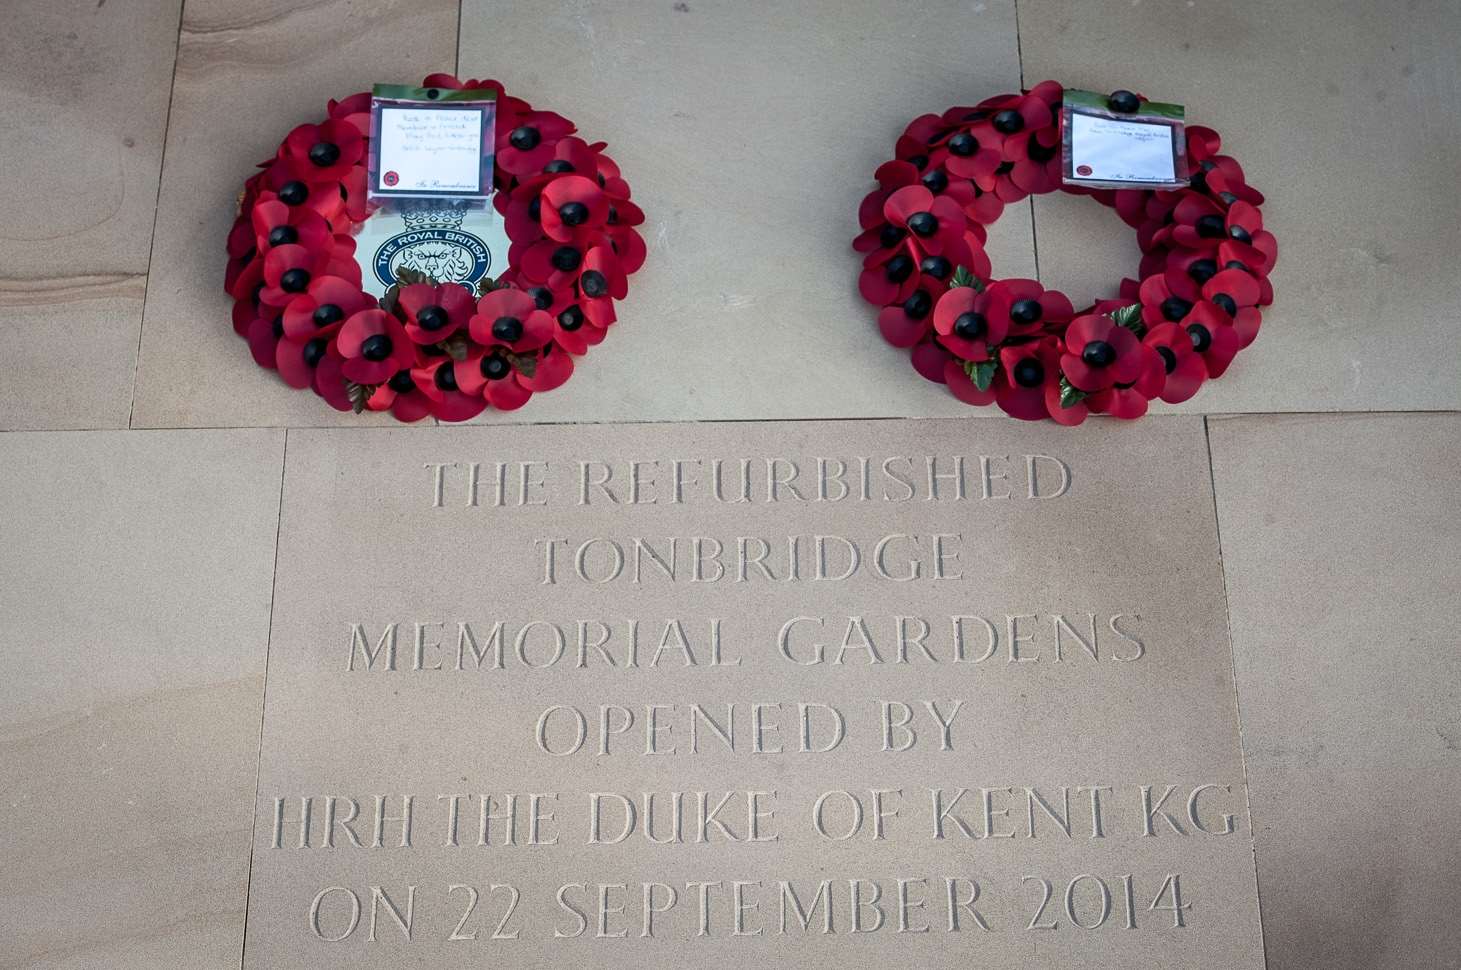 Wreaths and the new commemorative stone at Tonbridge Memorial Gardens